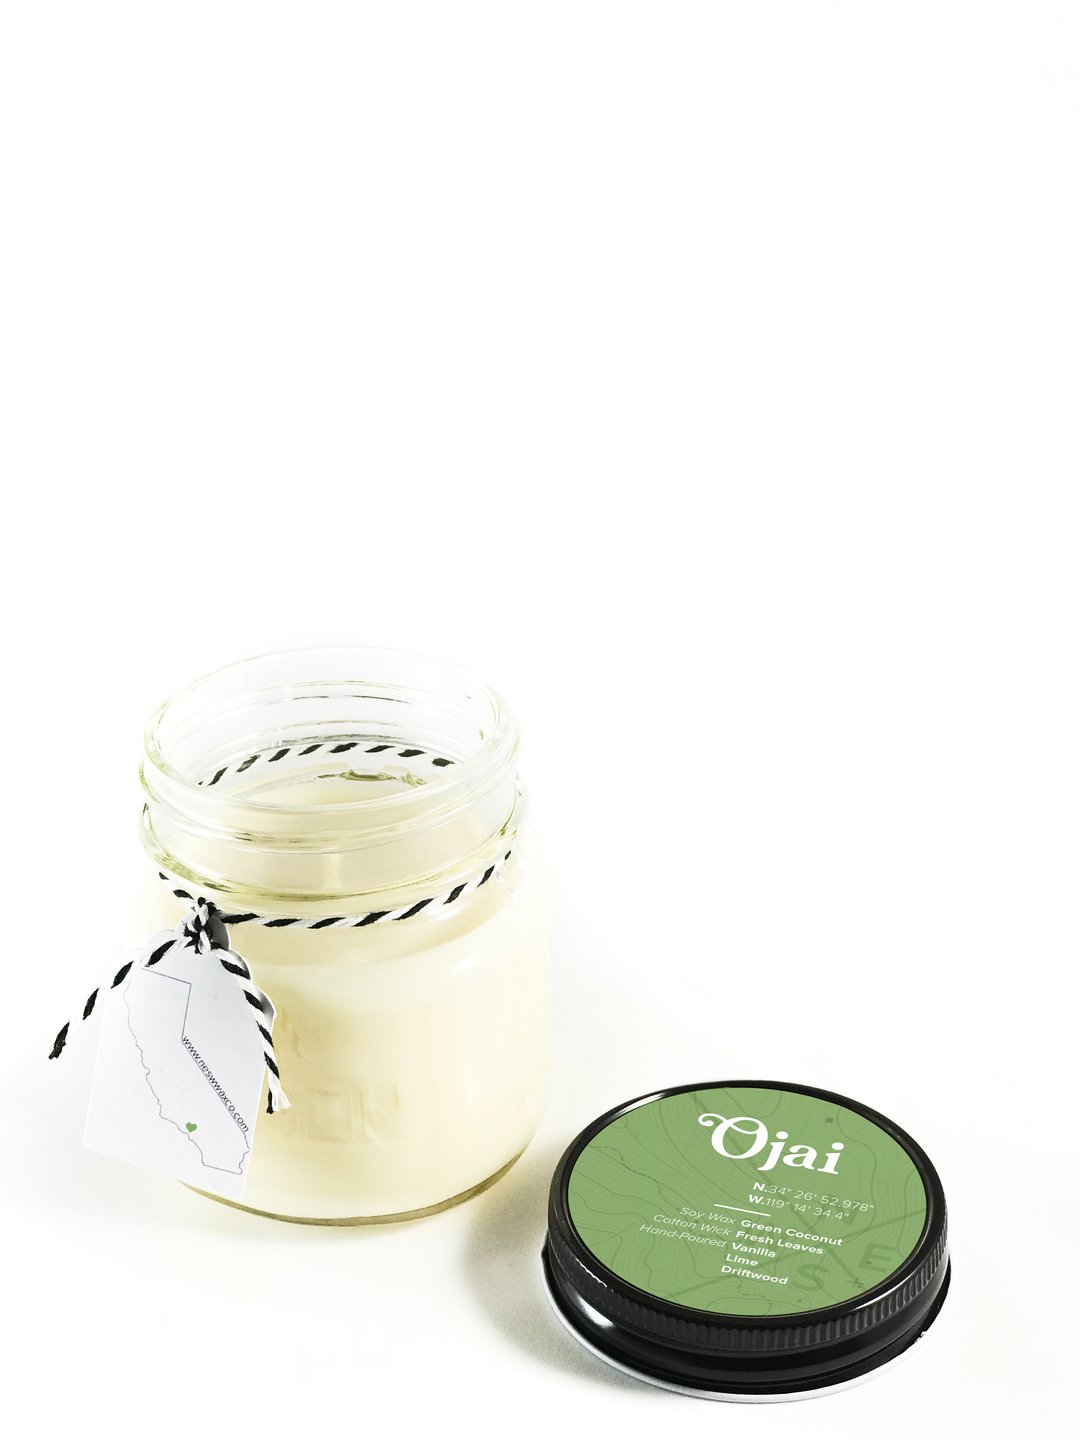 Ojai Soy Candle - Main Image Number 2 of 2